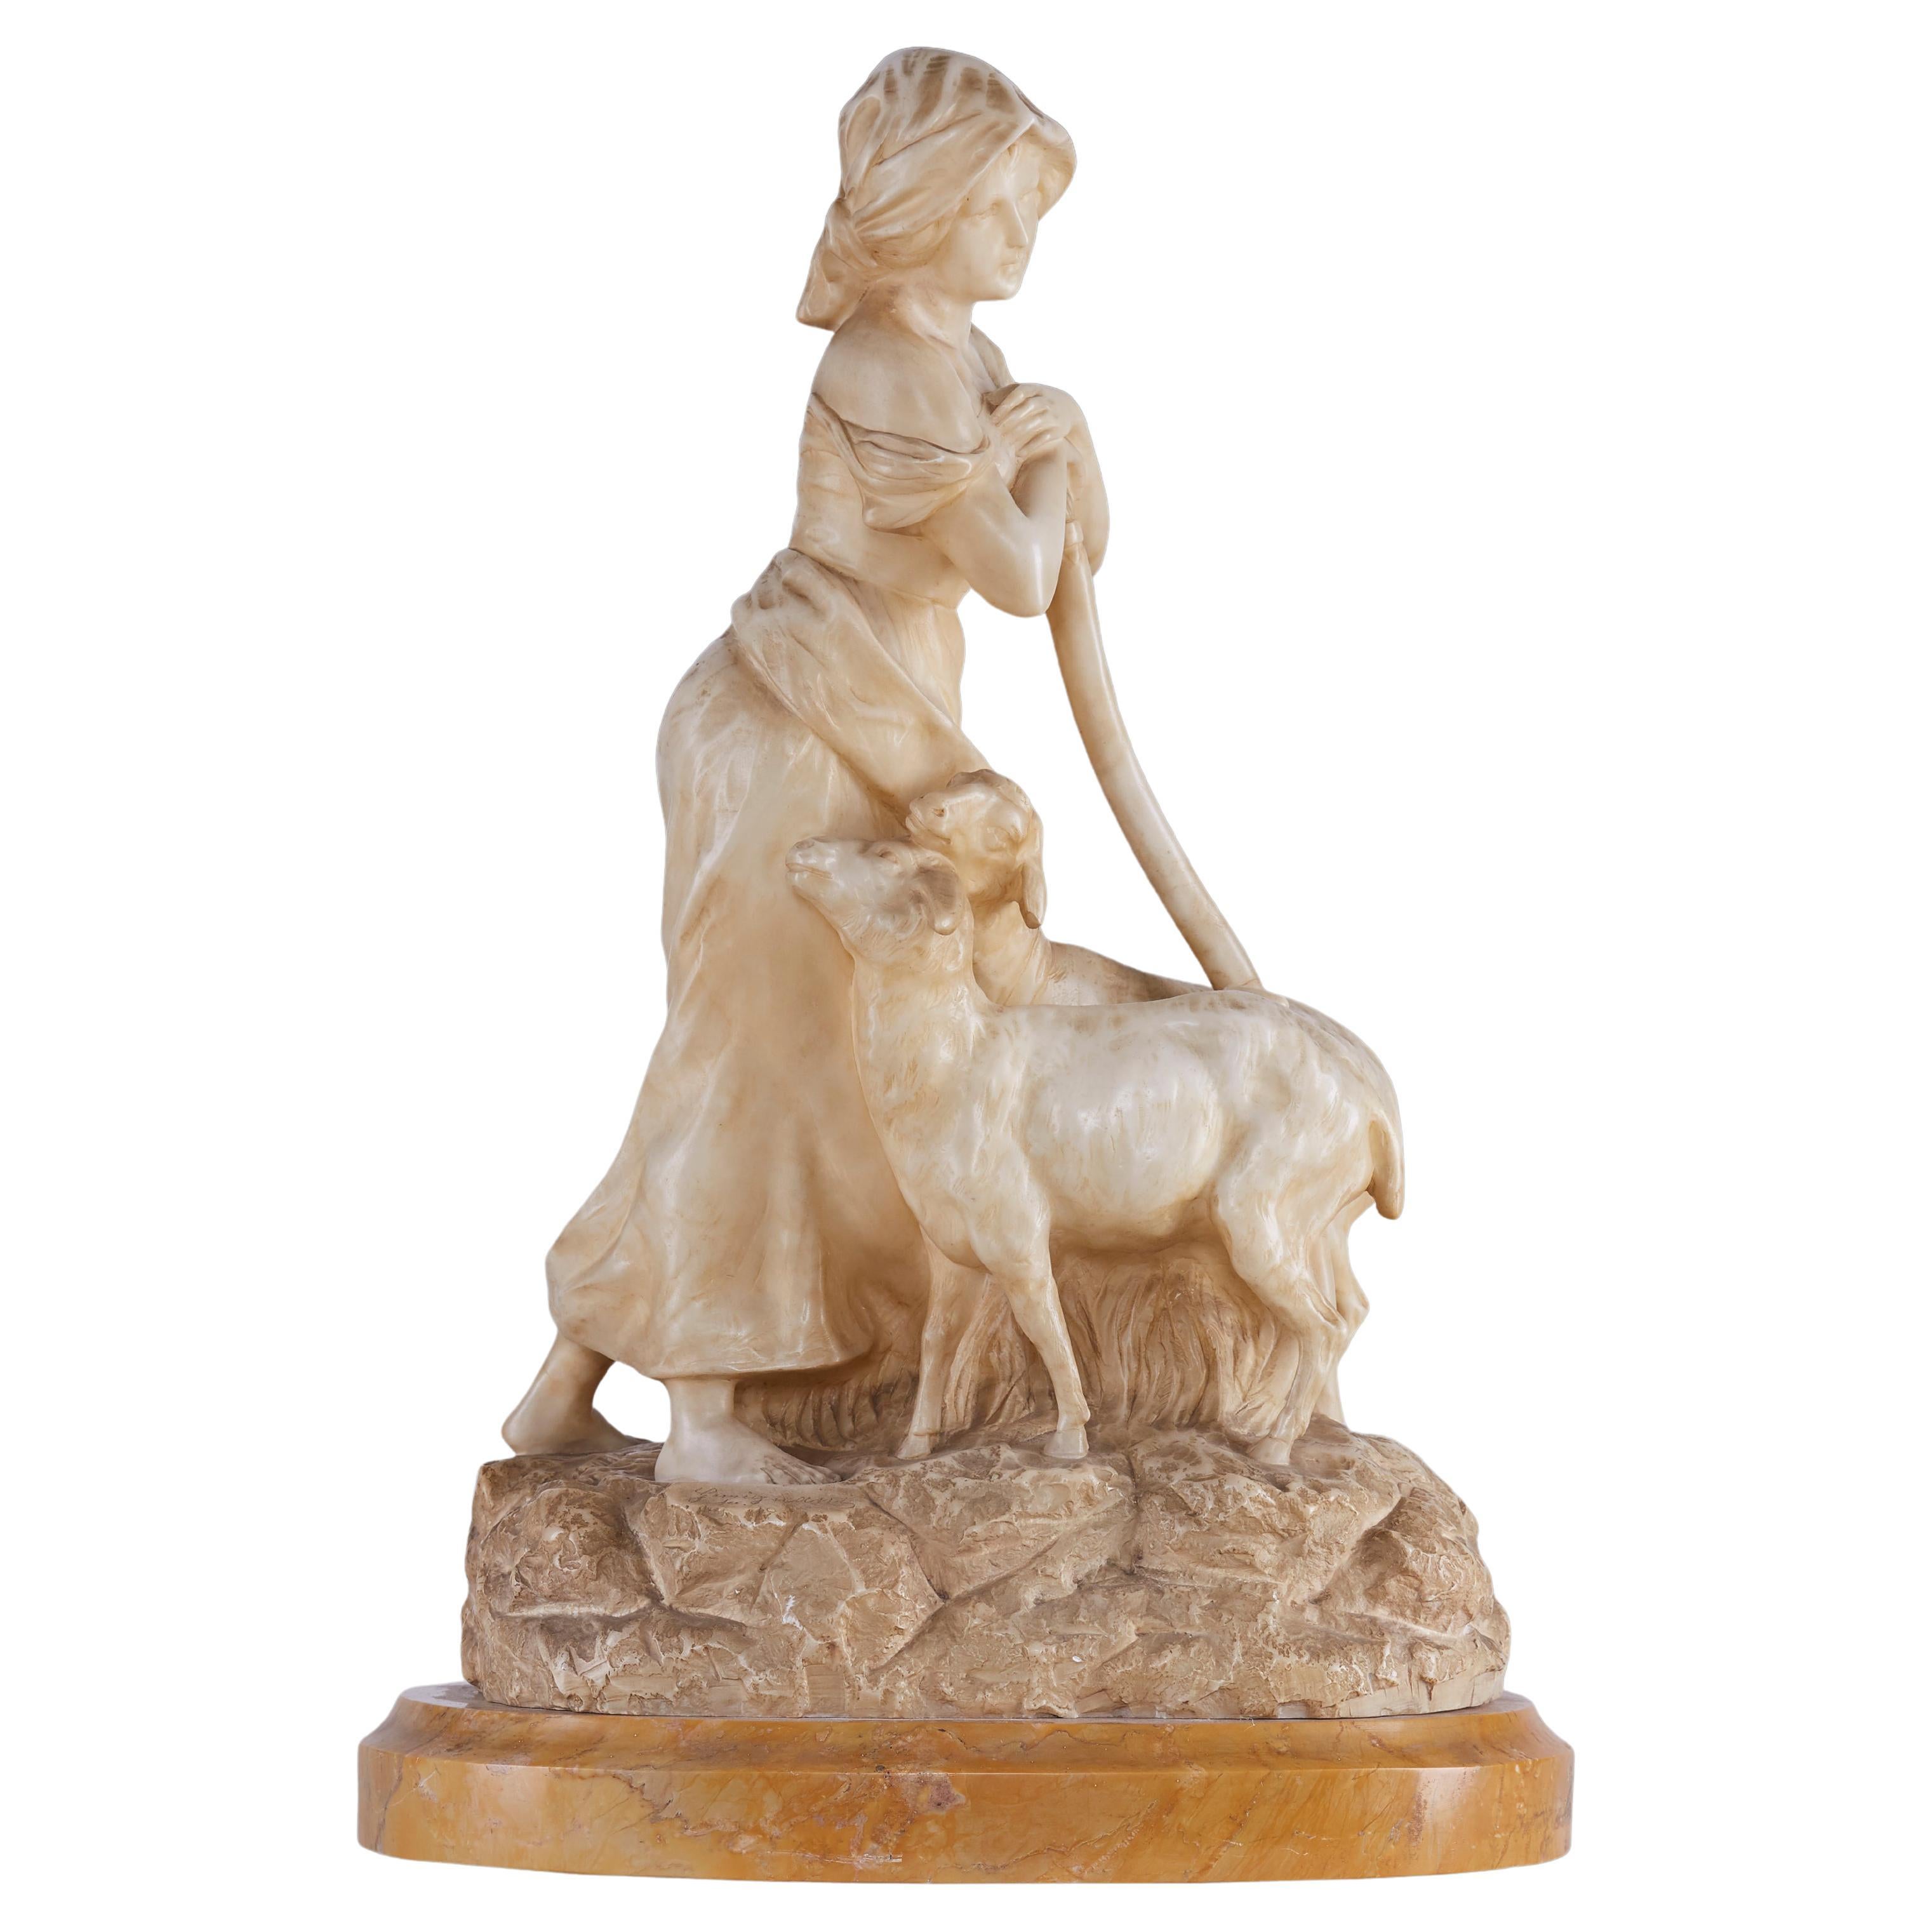 Statue of a Shepherd Girl Made from Marble